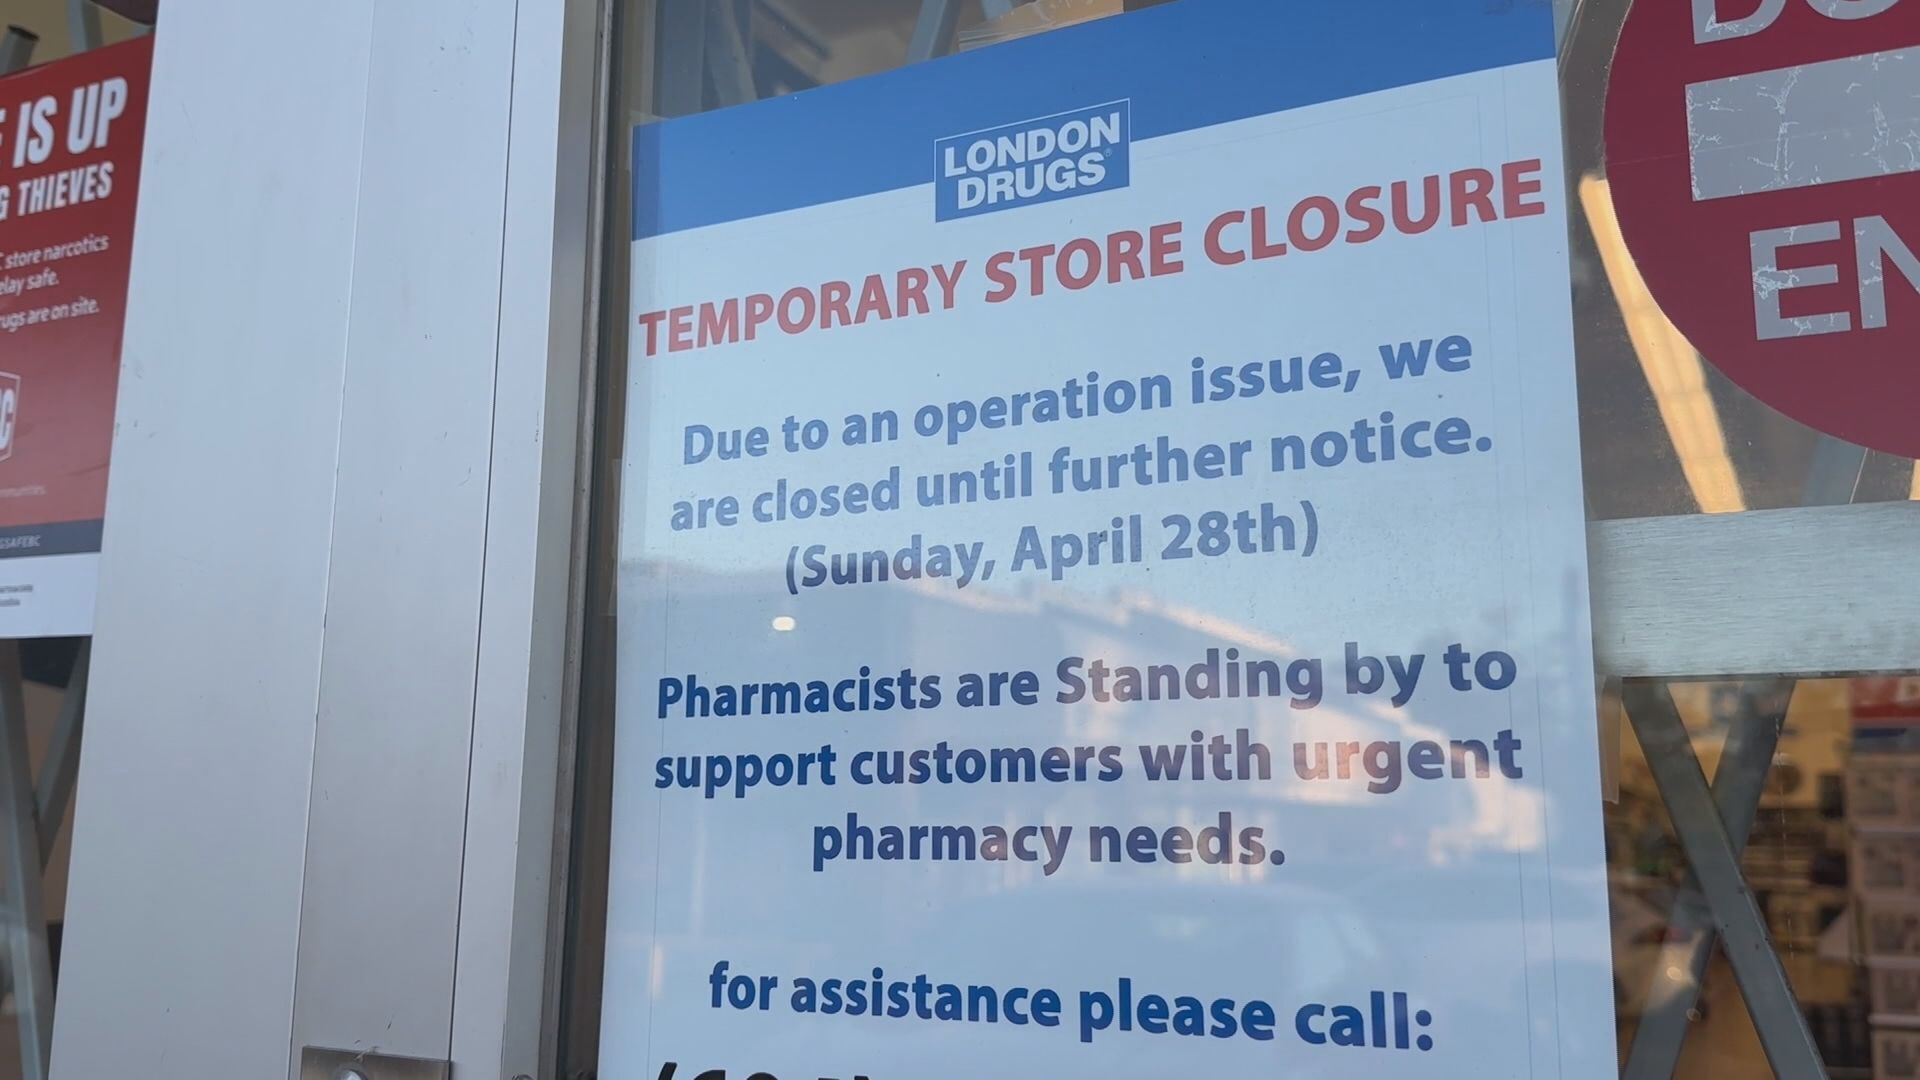 London Drugs stores still closed after cyberattack